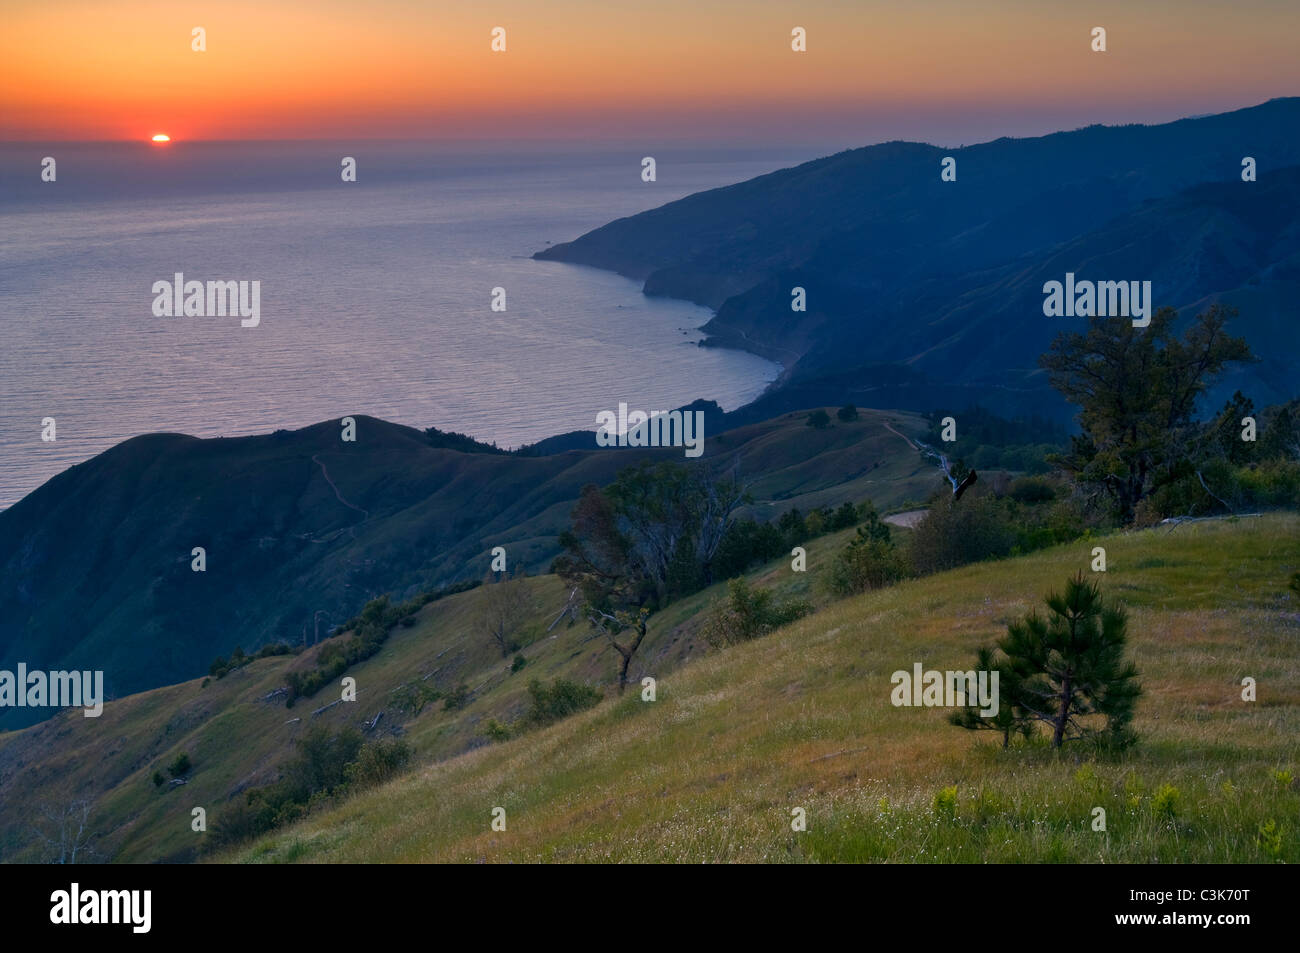 Sunset over the Pacific Ocean from the hills of the Ventana Wilderness, Los Padres National Forest, Big Sur coast, California Stock Photo